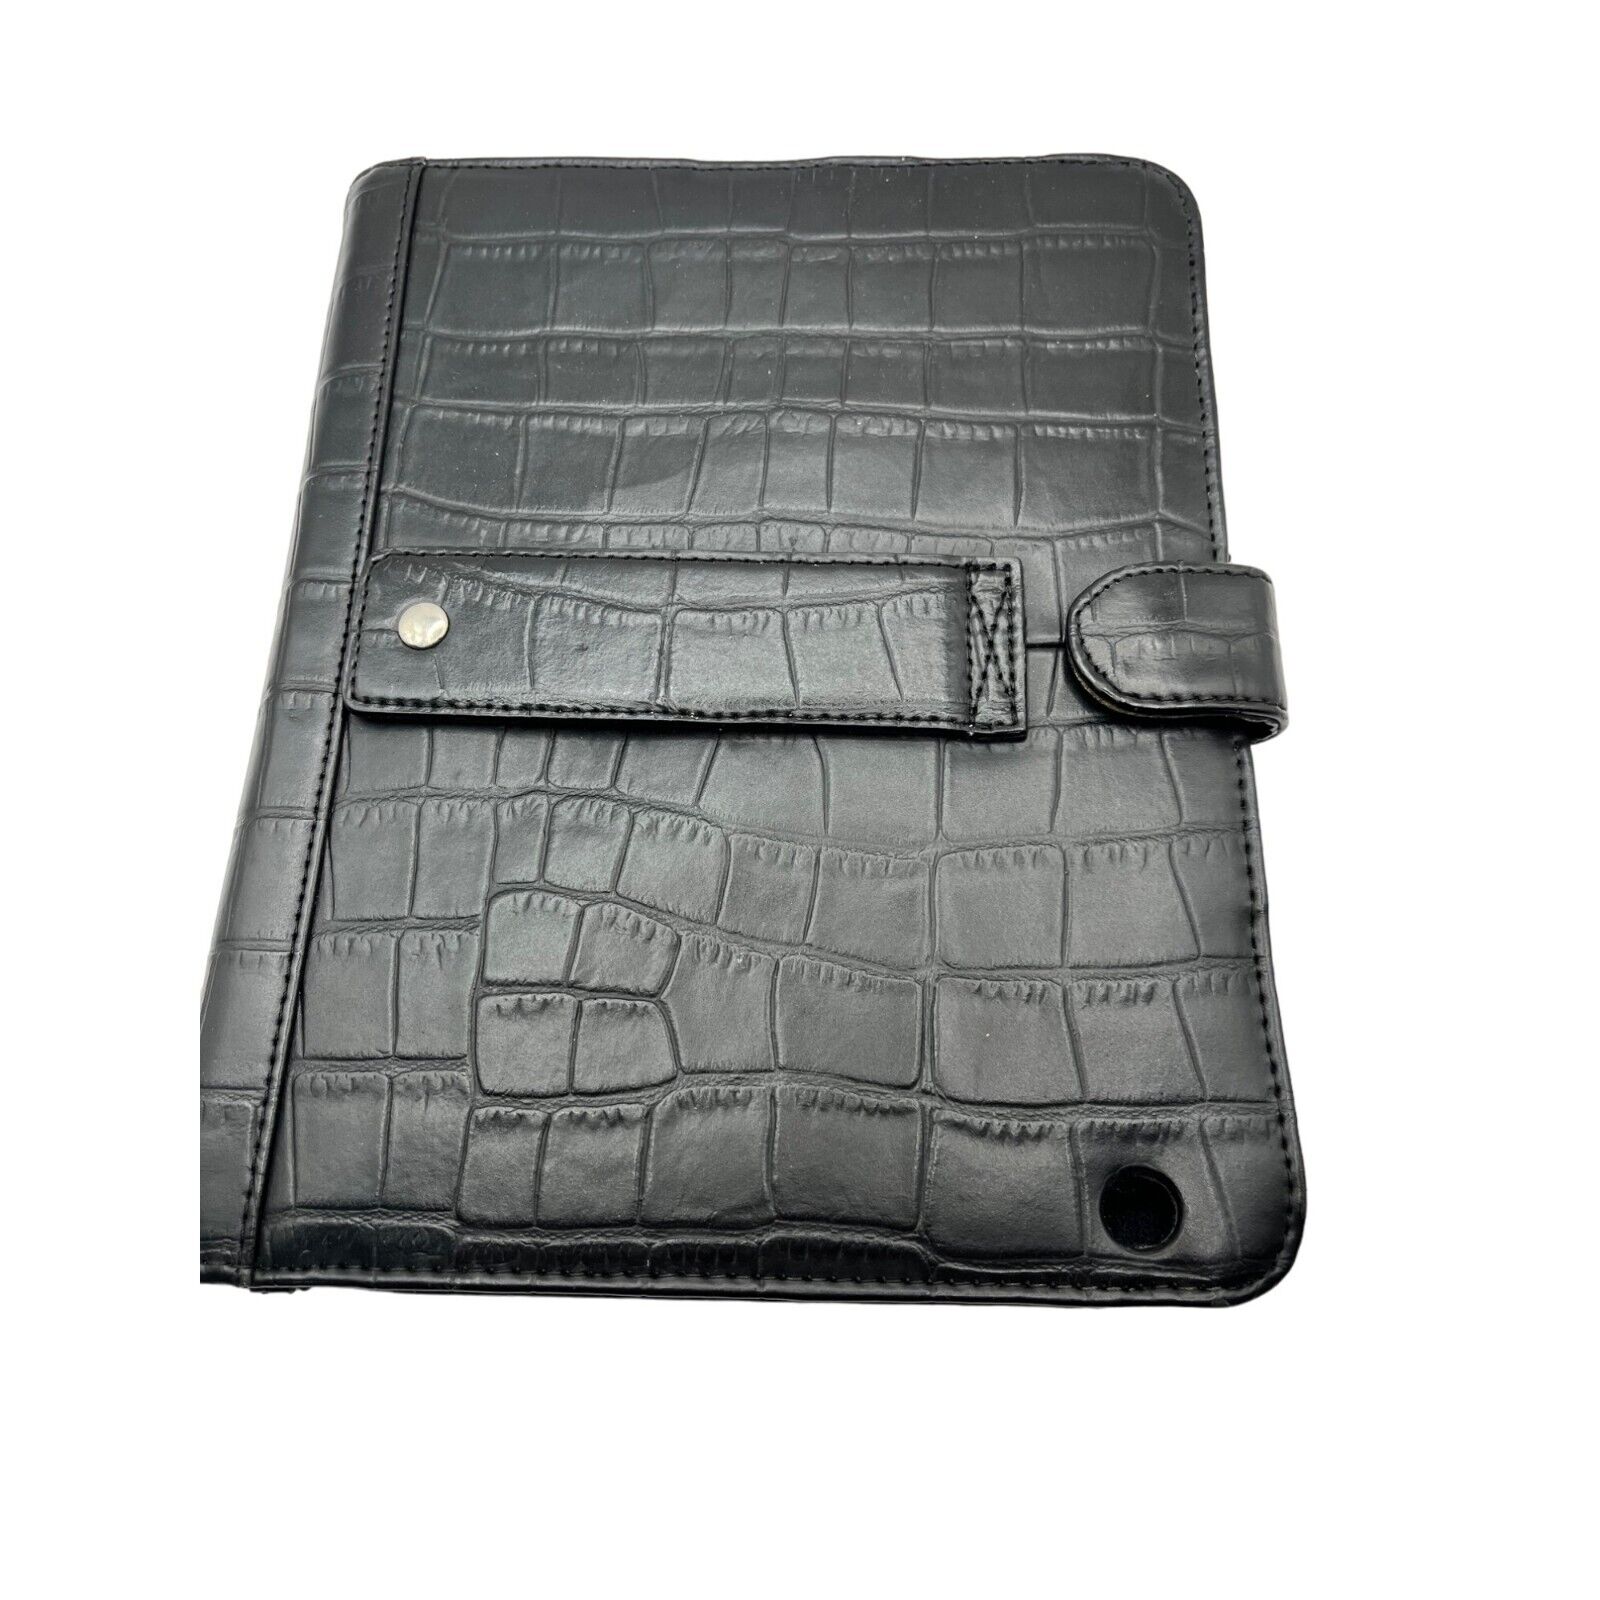 Black Faux Croc Leather iPad Case Cover With Snap Closure